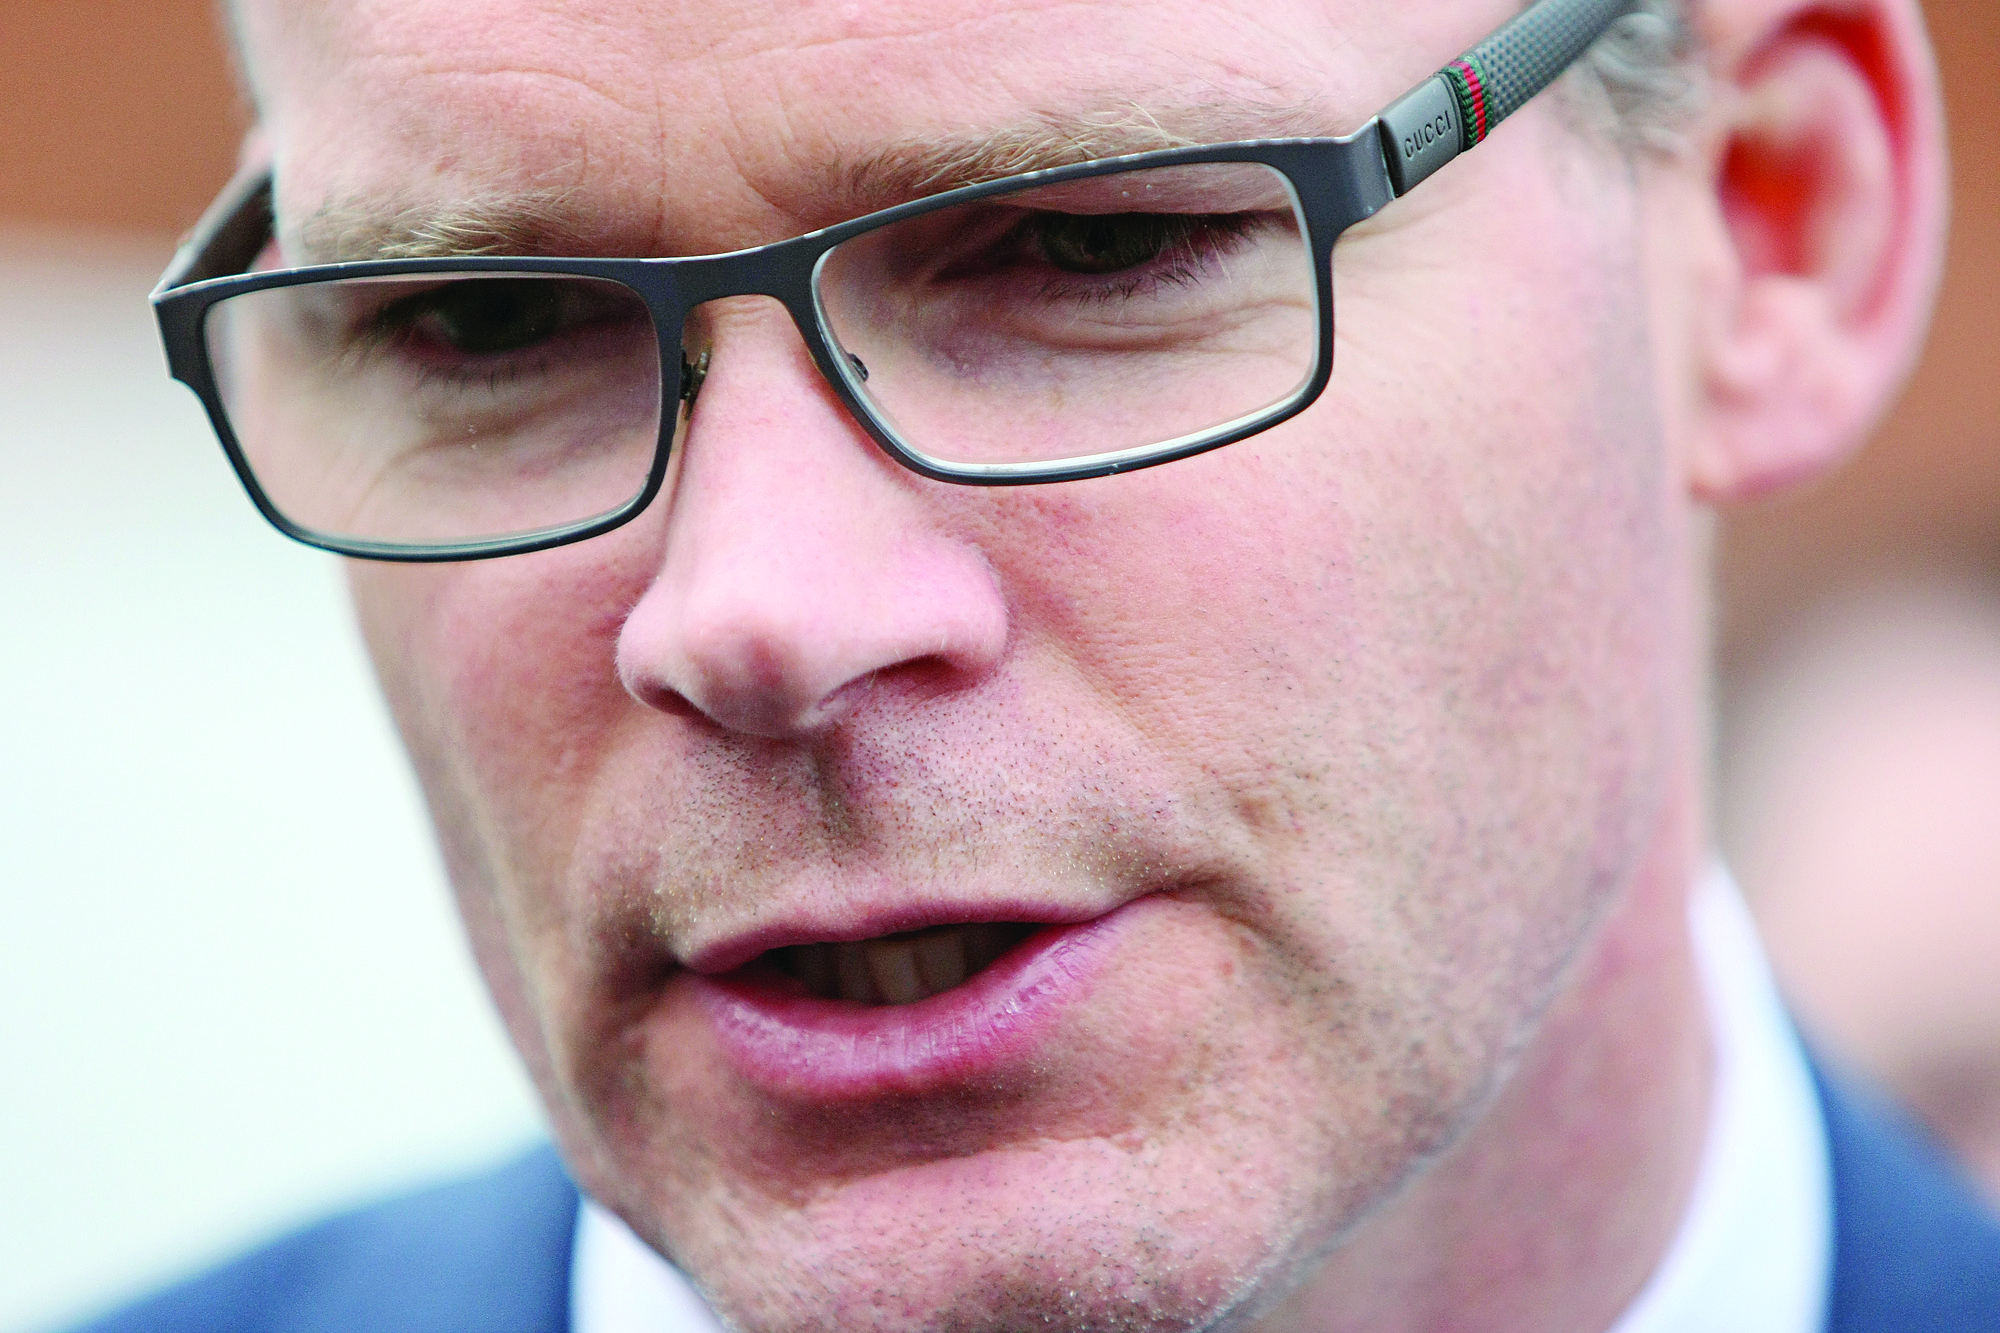 SNUBBED: Irish Minister for Foreign Affairs, Simon Coveney